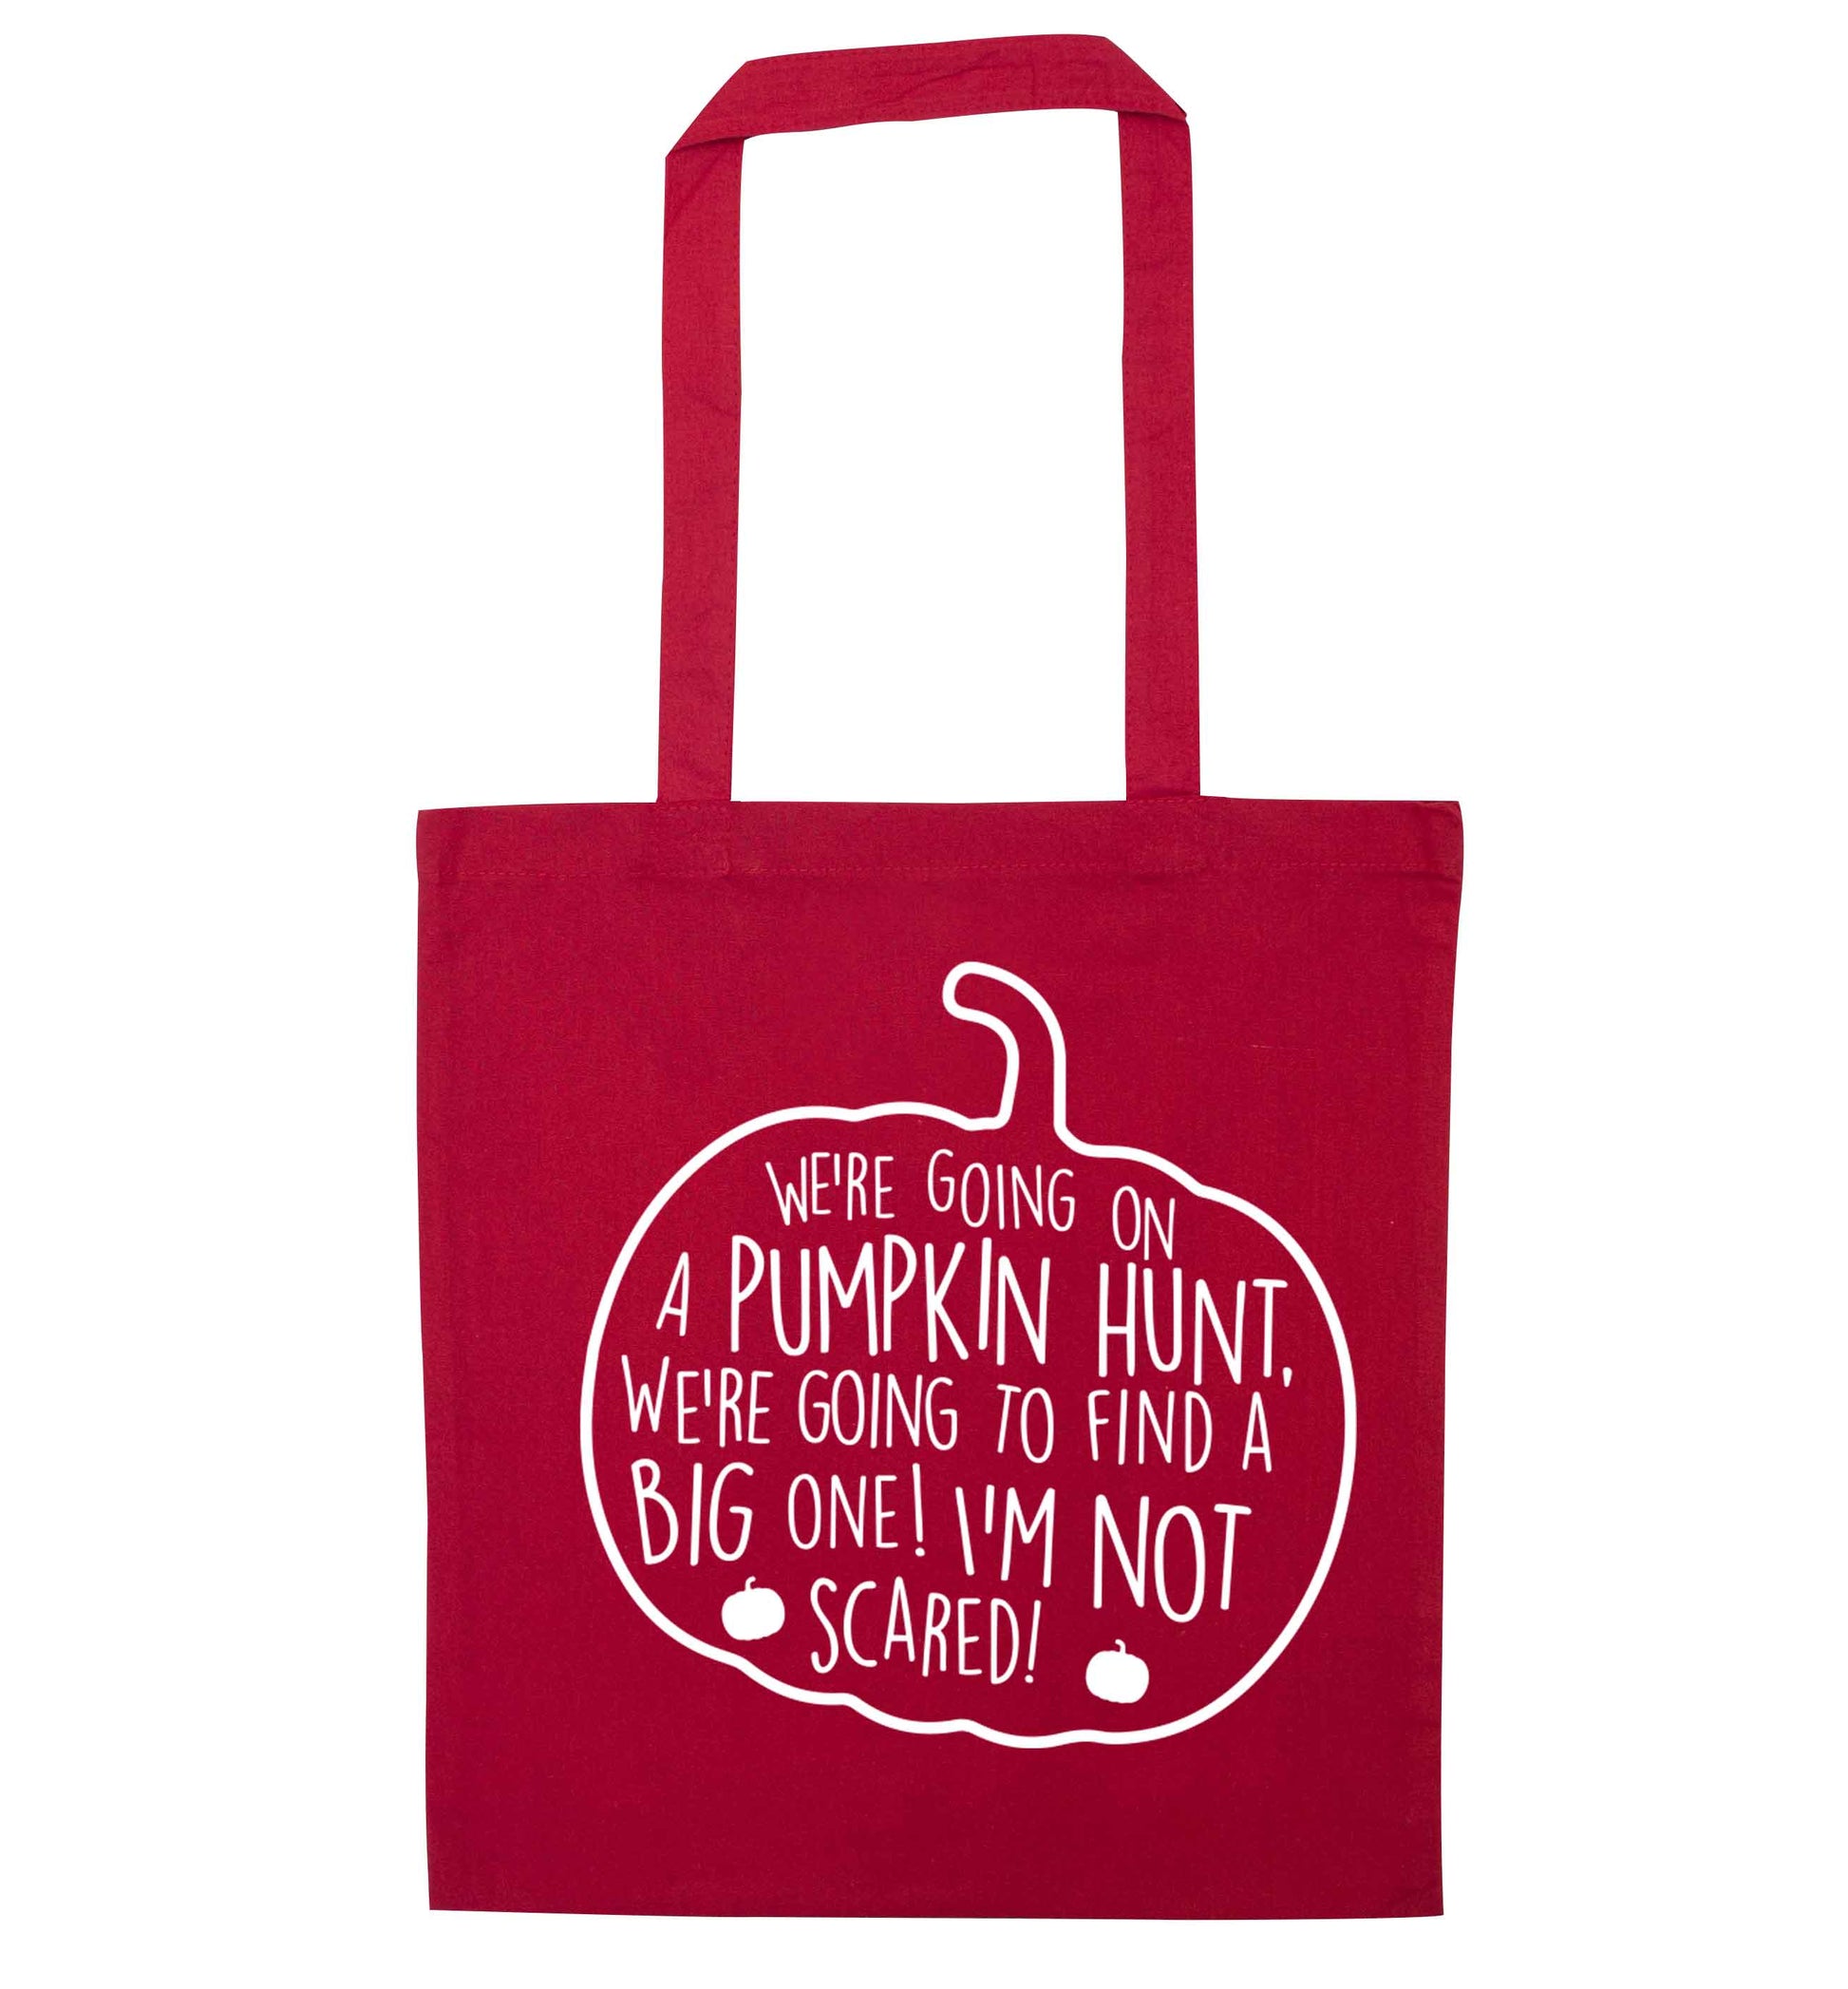 We're going on a pumpkin hunt red tote bag